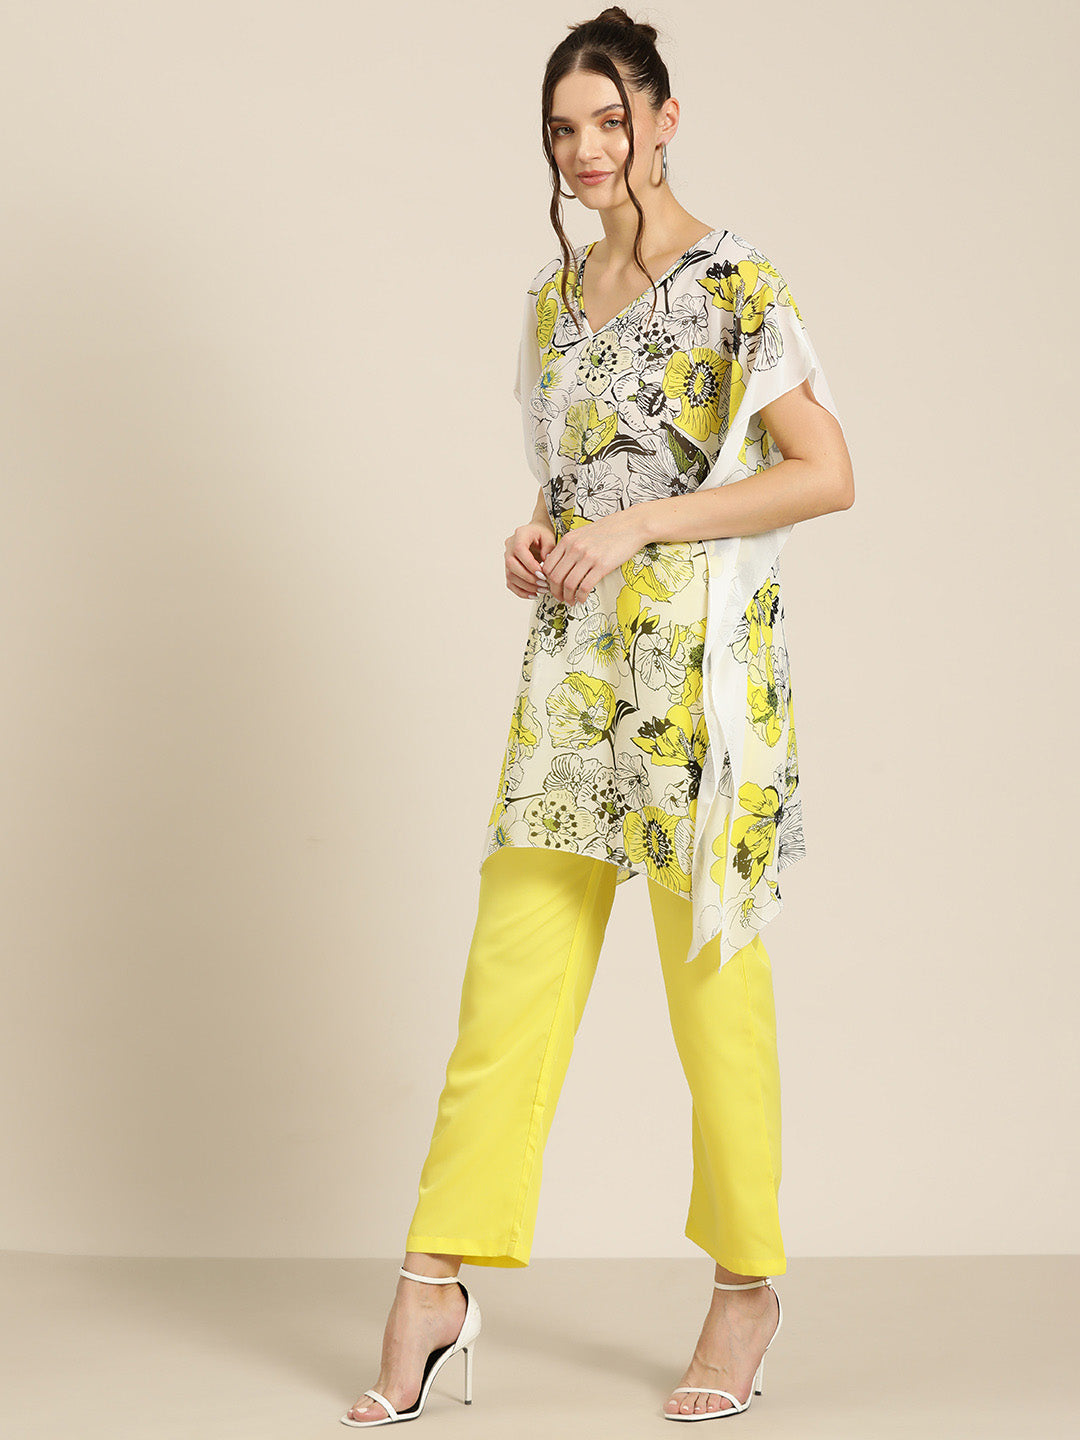 Neon yellow V-Neck top with pant co-ord set.